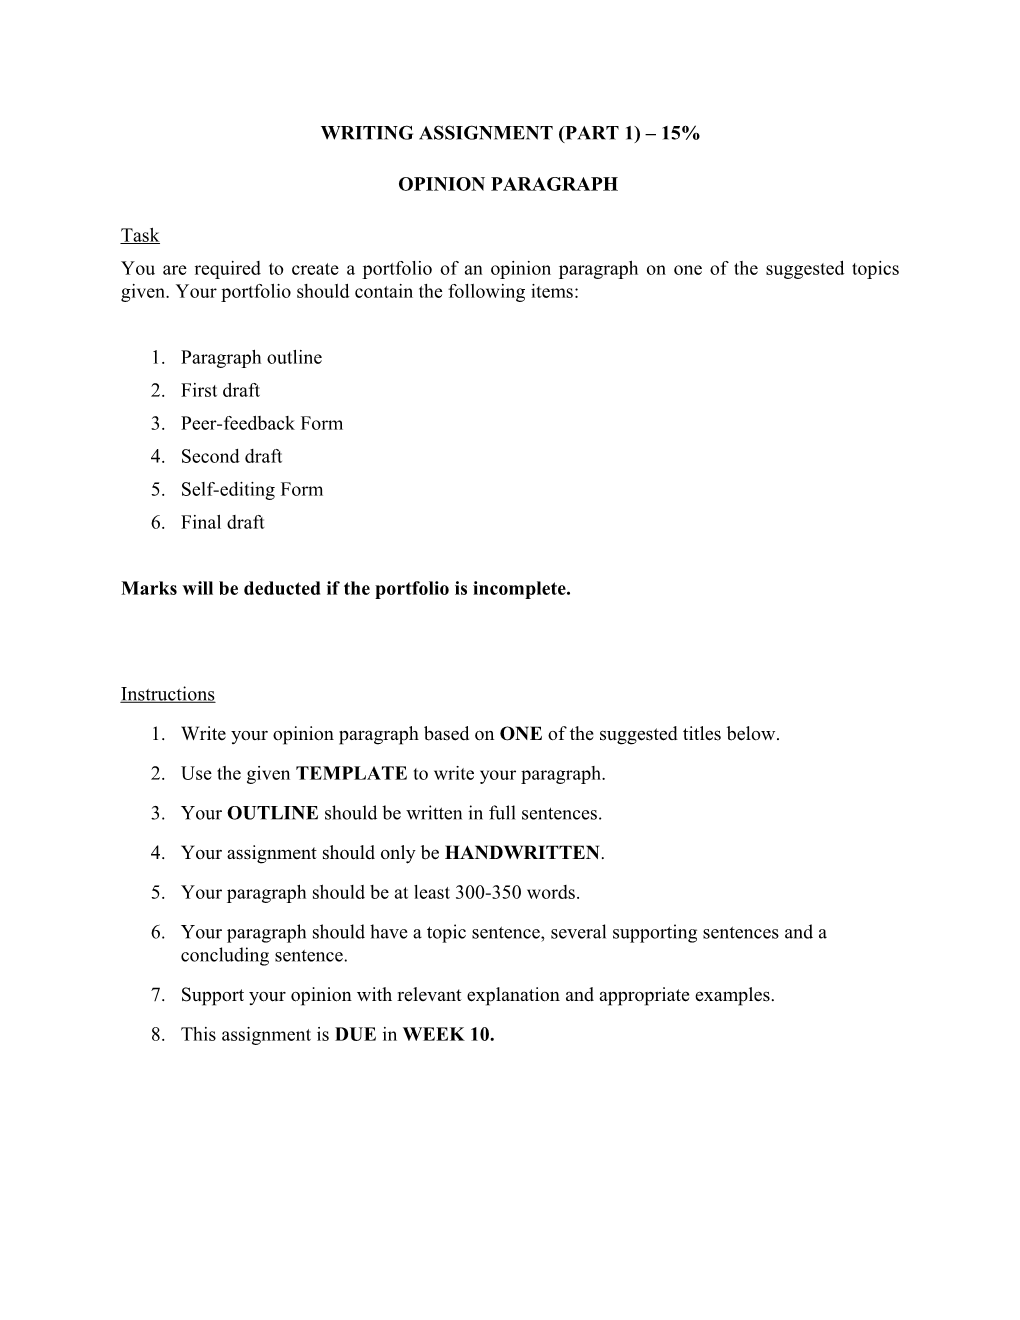 Writing Assignment 2 Outline (Opinion Essay)